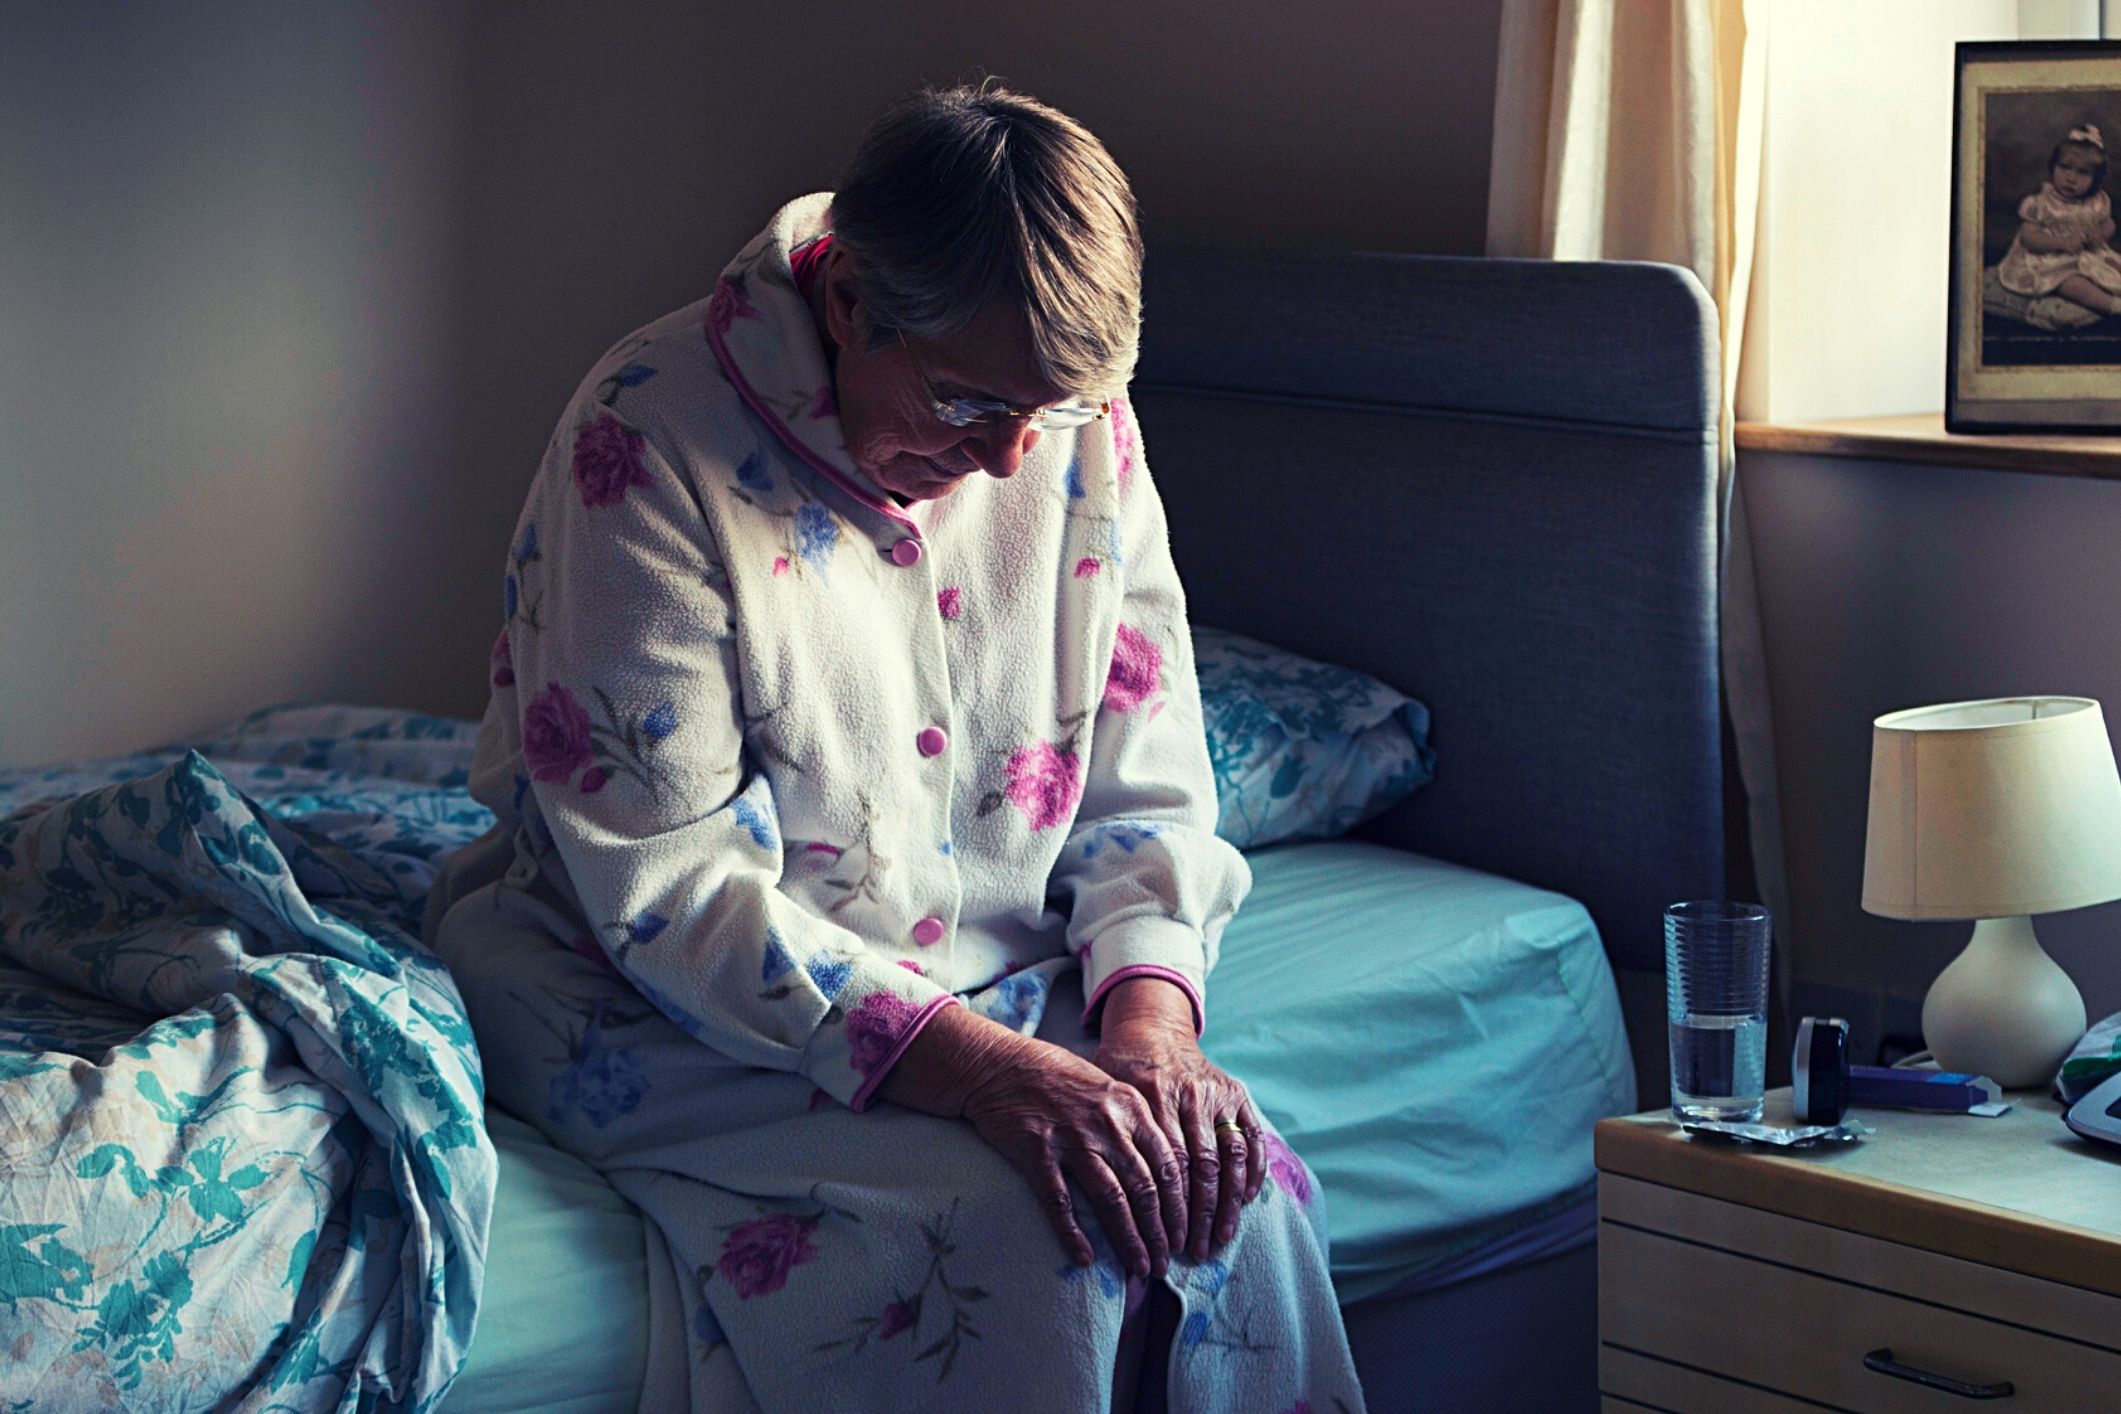 Elephant in the room: How do we prevent sexual assaults in aged care facilities?